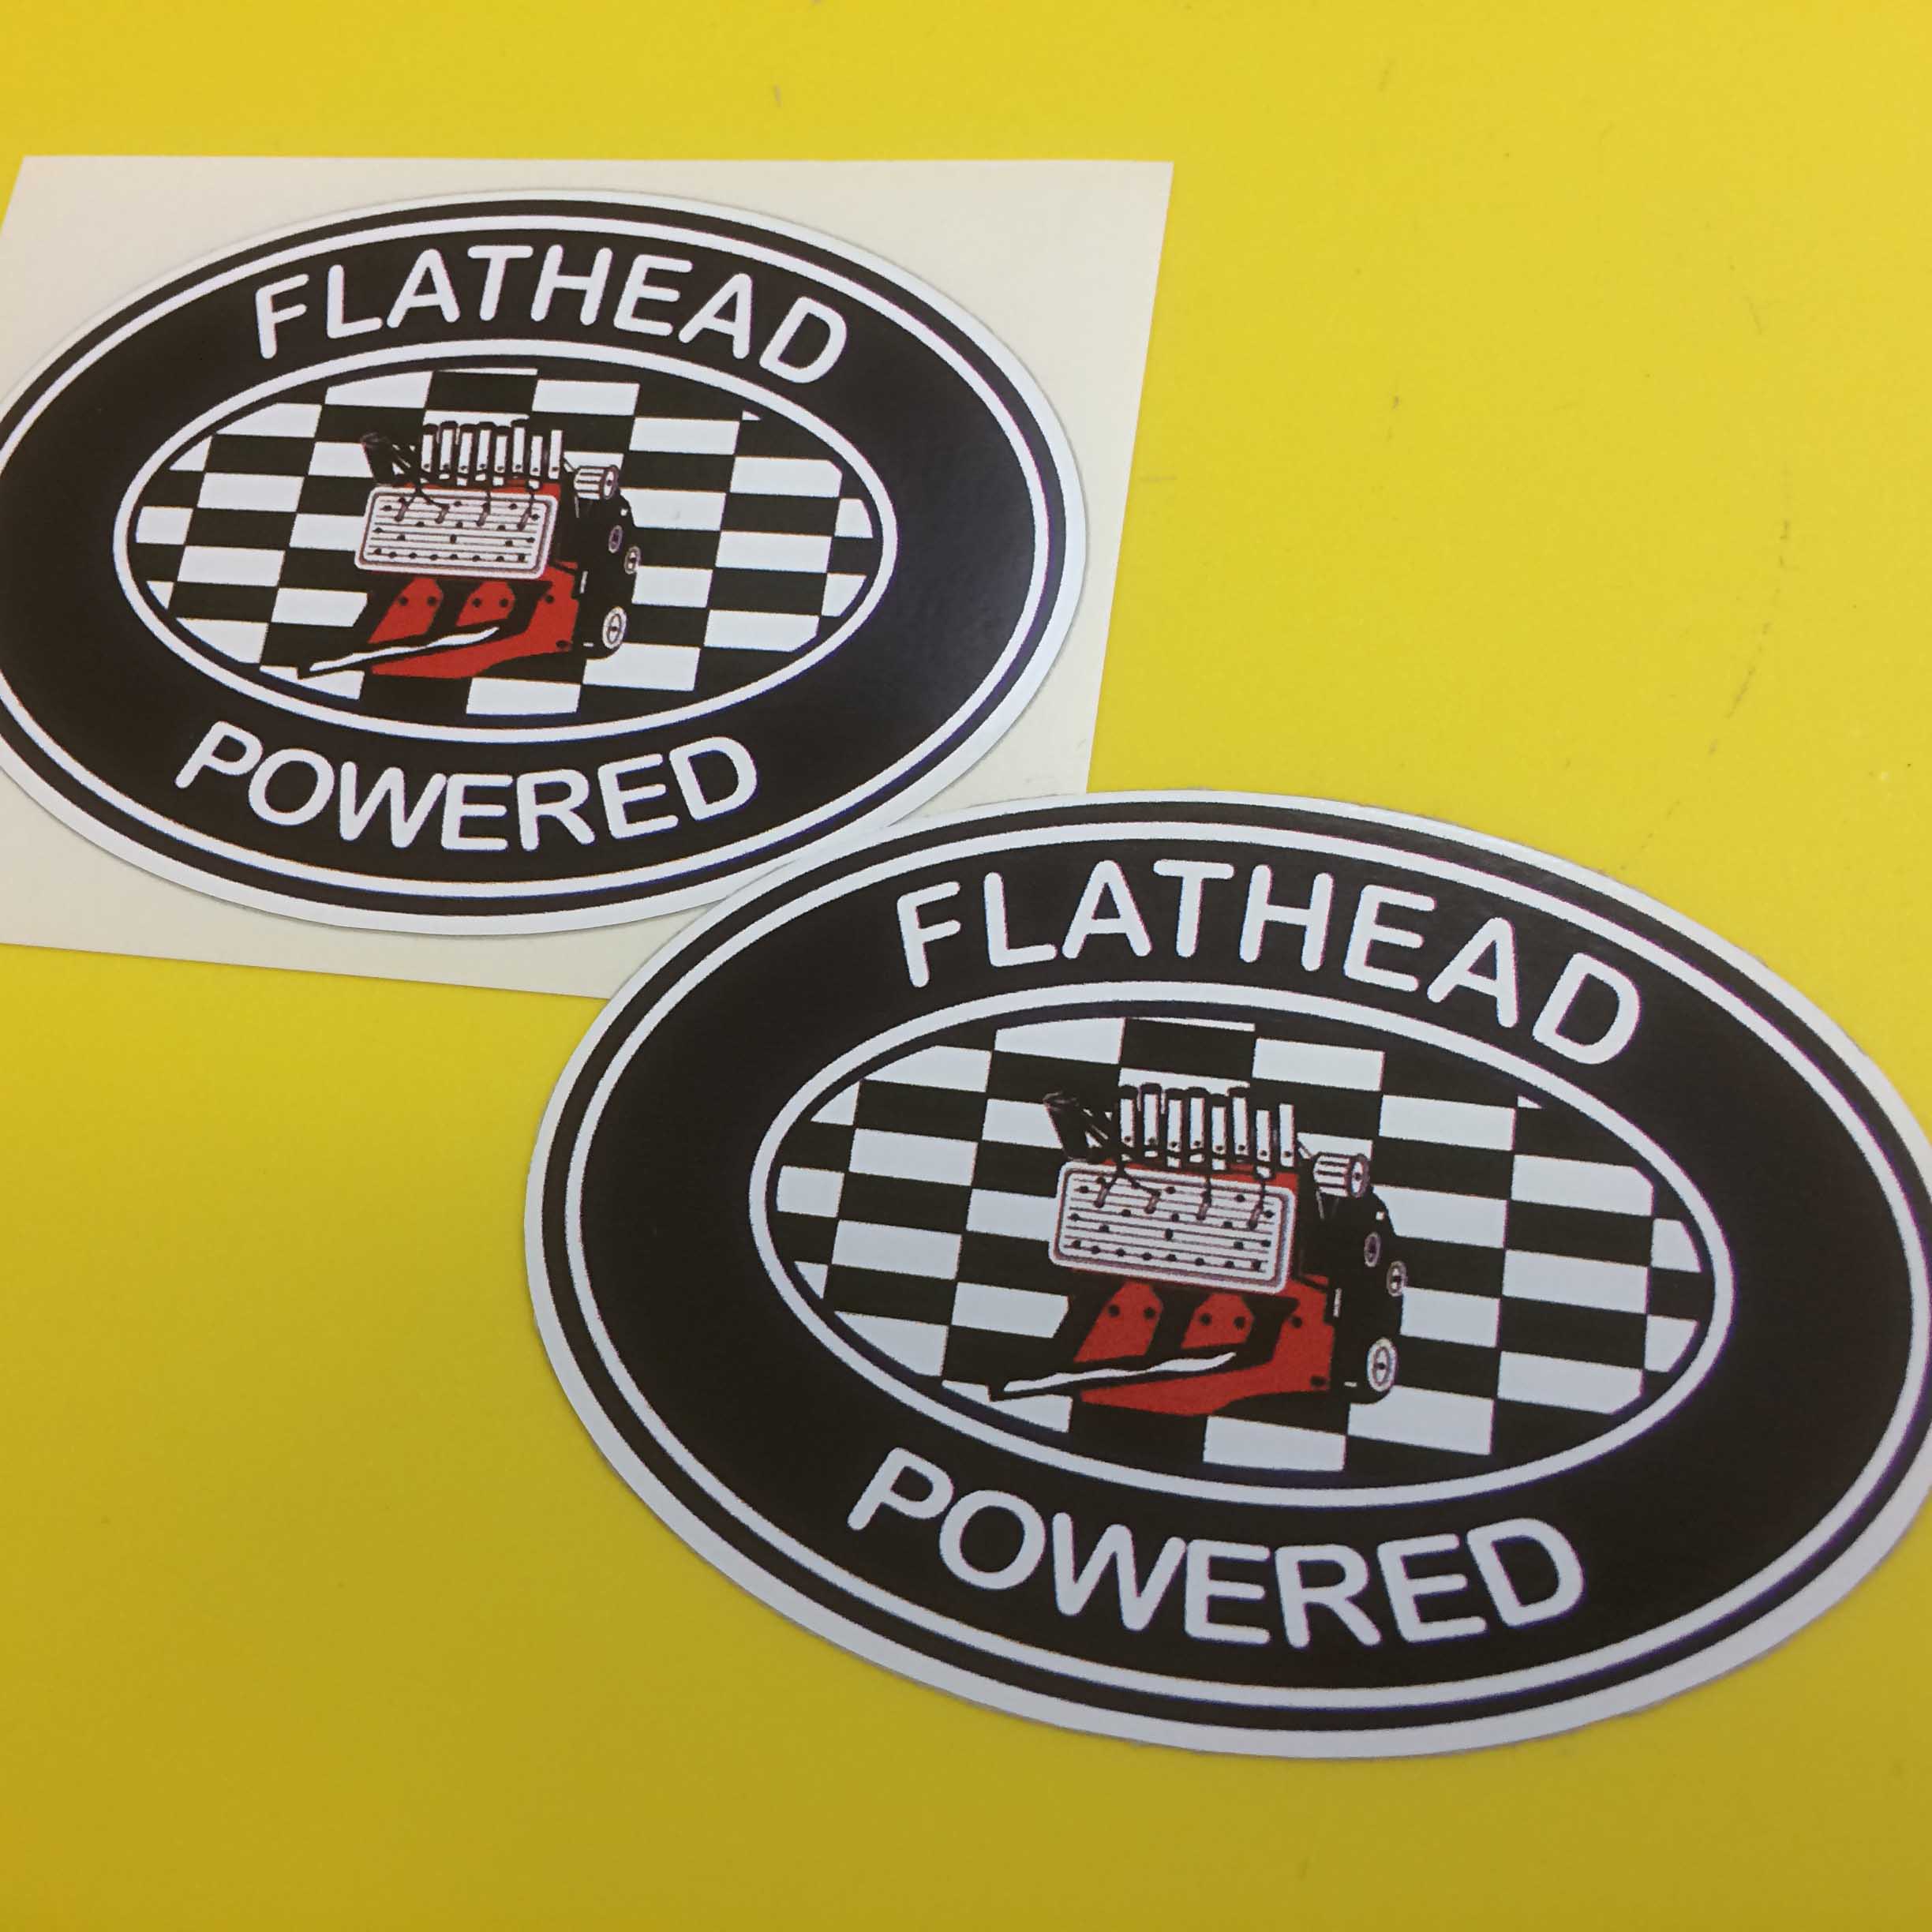 Flathead Powered in white lettering surrounds a black oval sticker. In the centre is a red flathead engine on a black and white chequer oval.